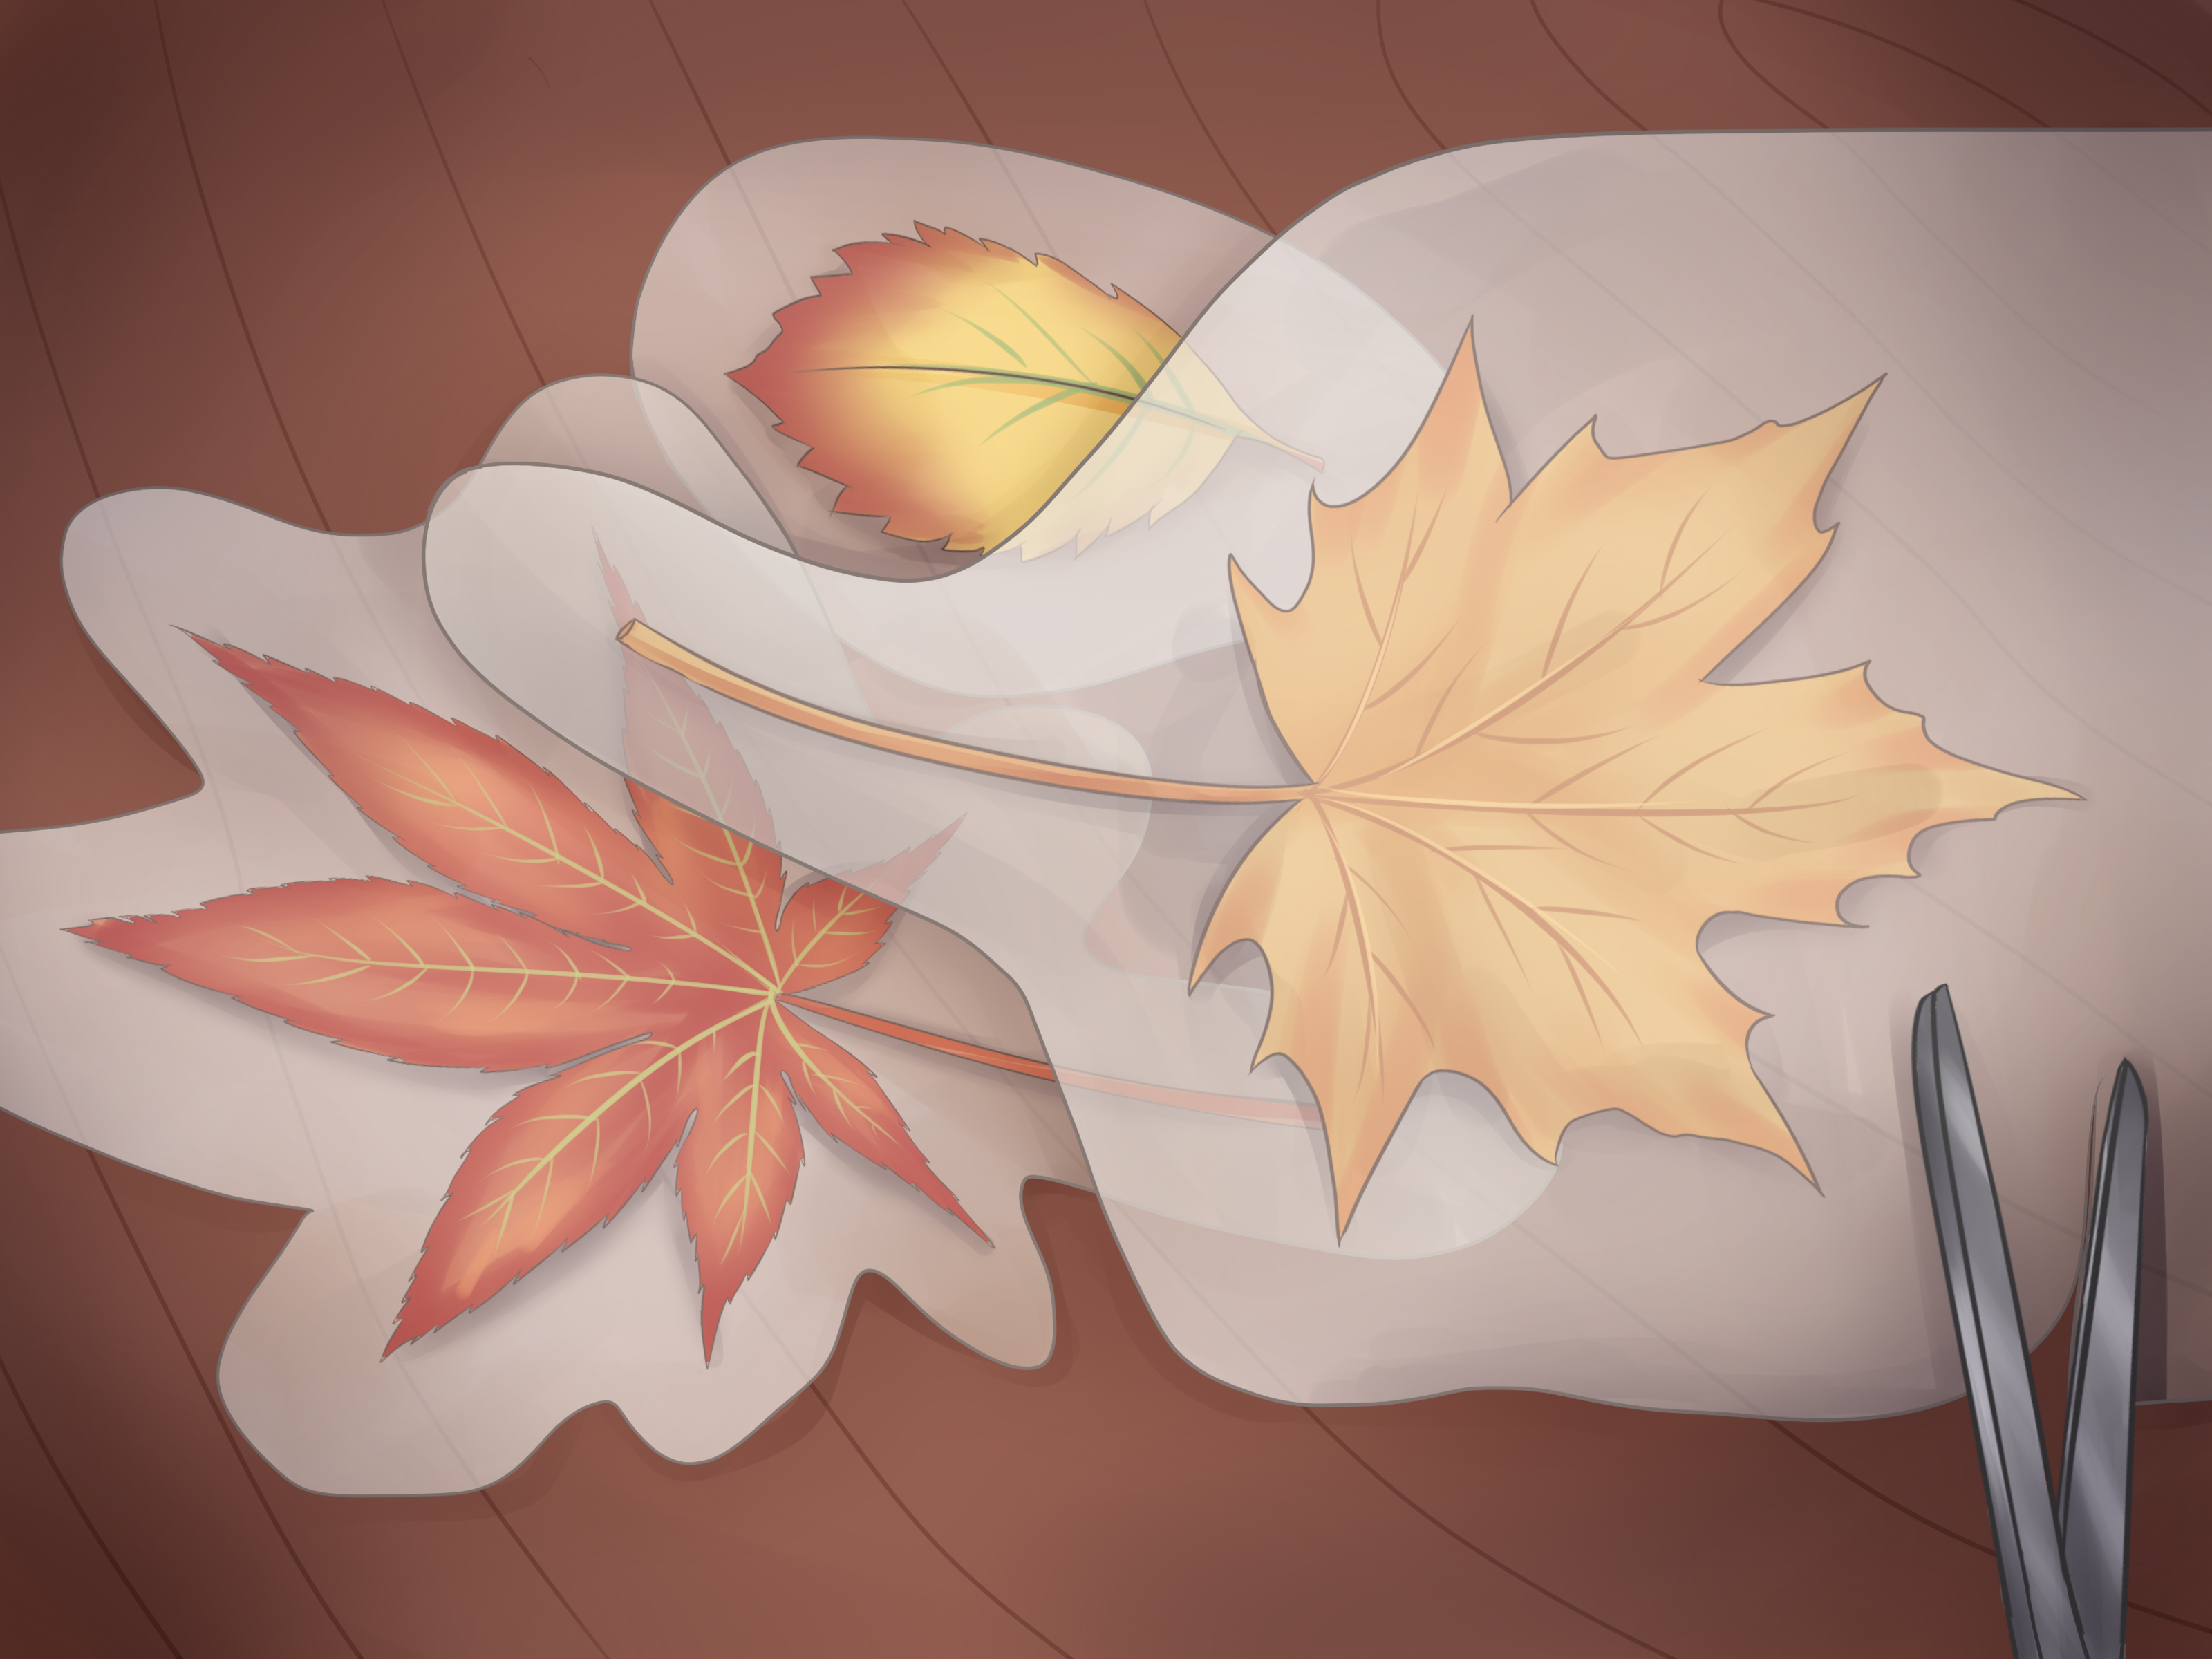 6 Ways to Preserve Fall Leaves - wikiHow